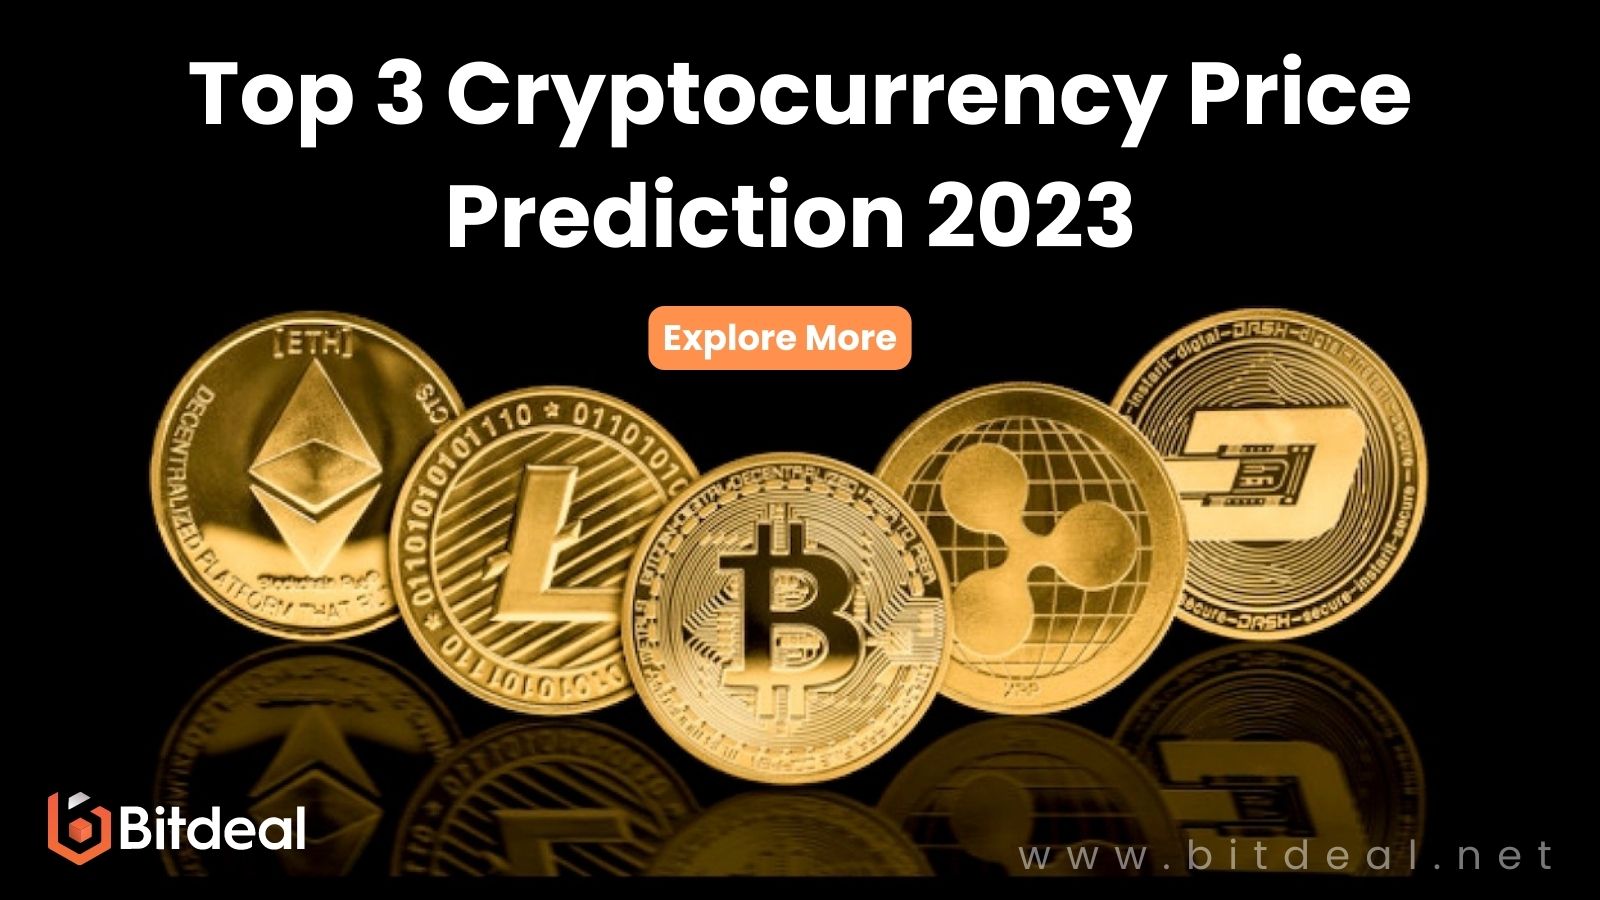 Top 3 Cryptocurrency Price Prediction in 2023